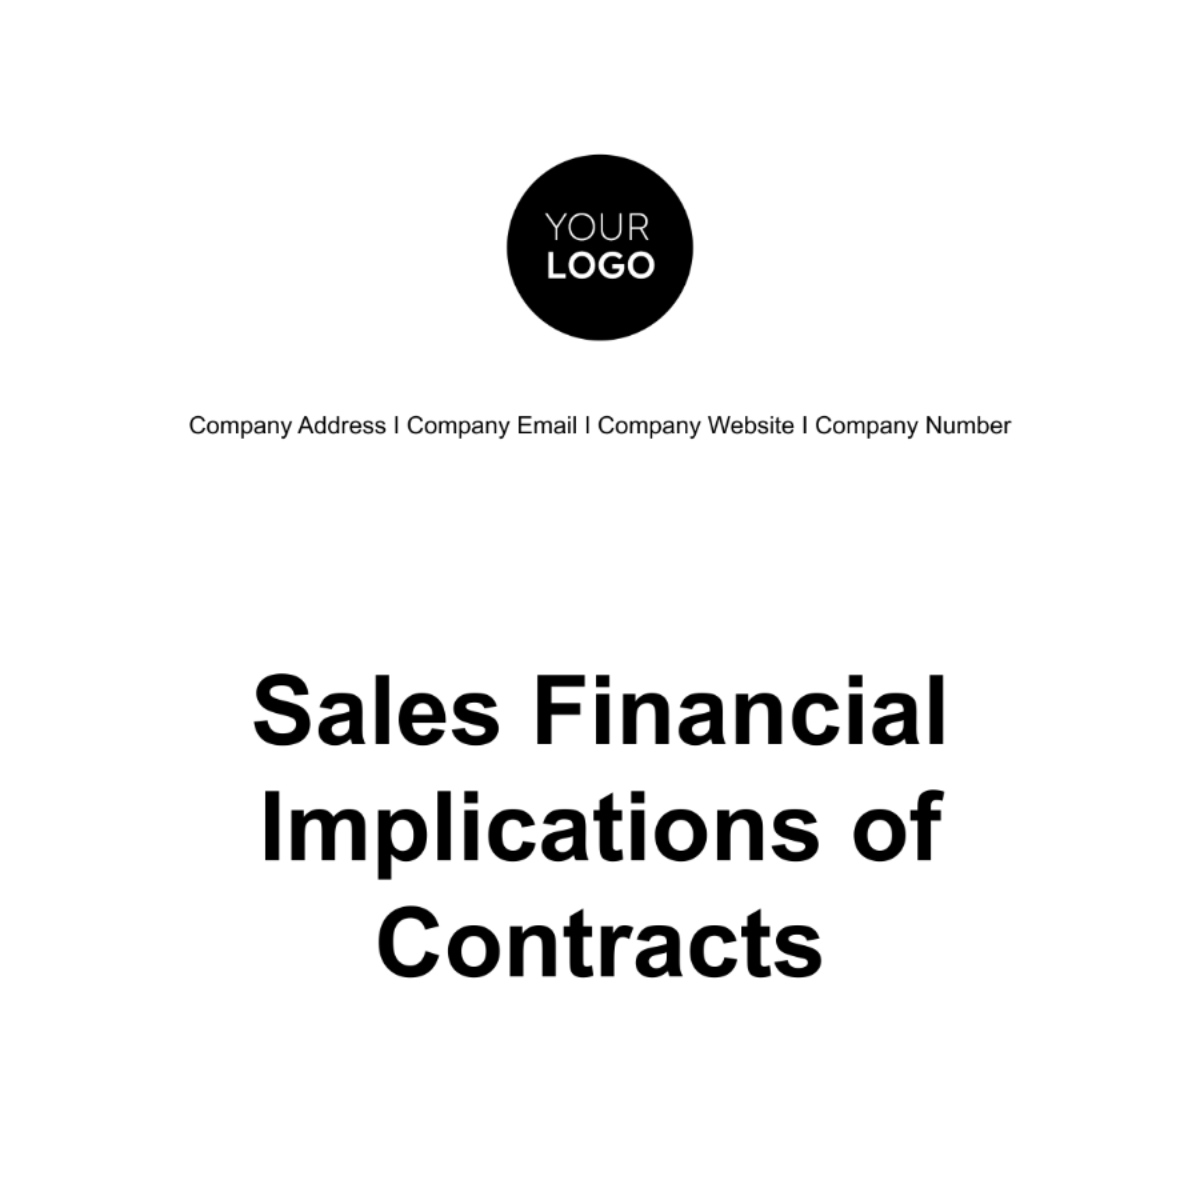 Free Sales Financial Implications of Contracts Template